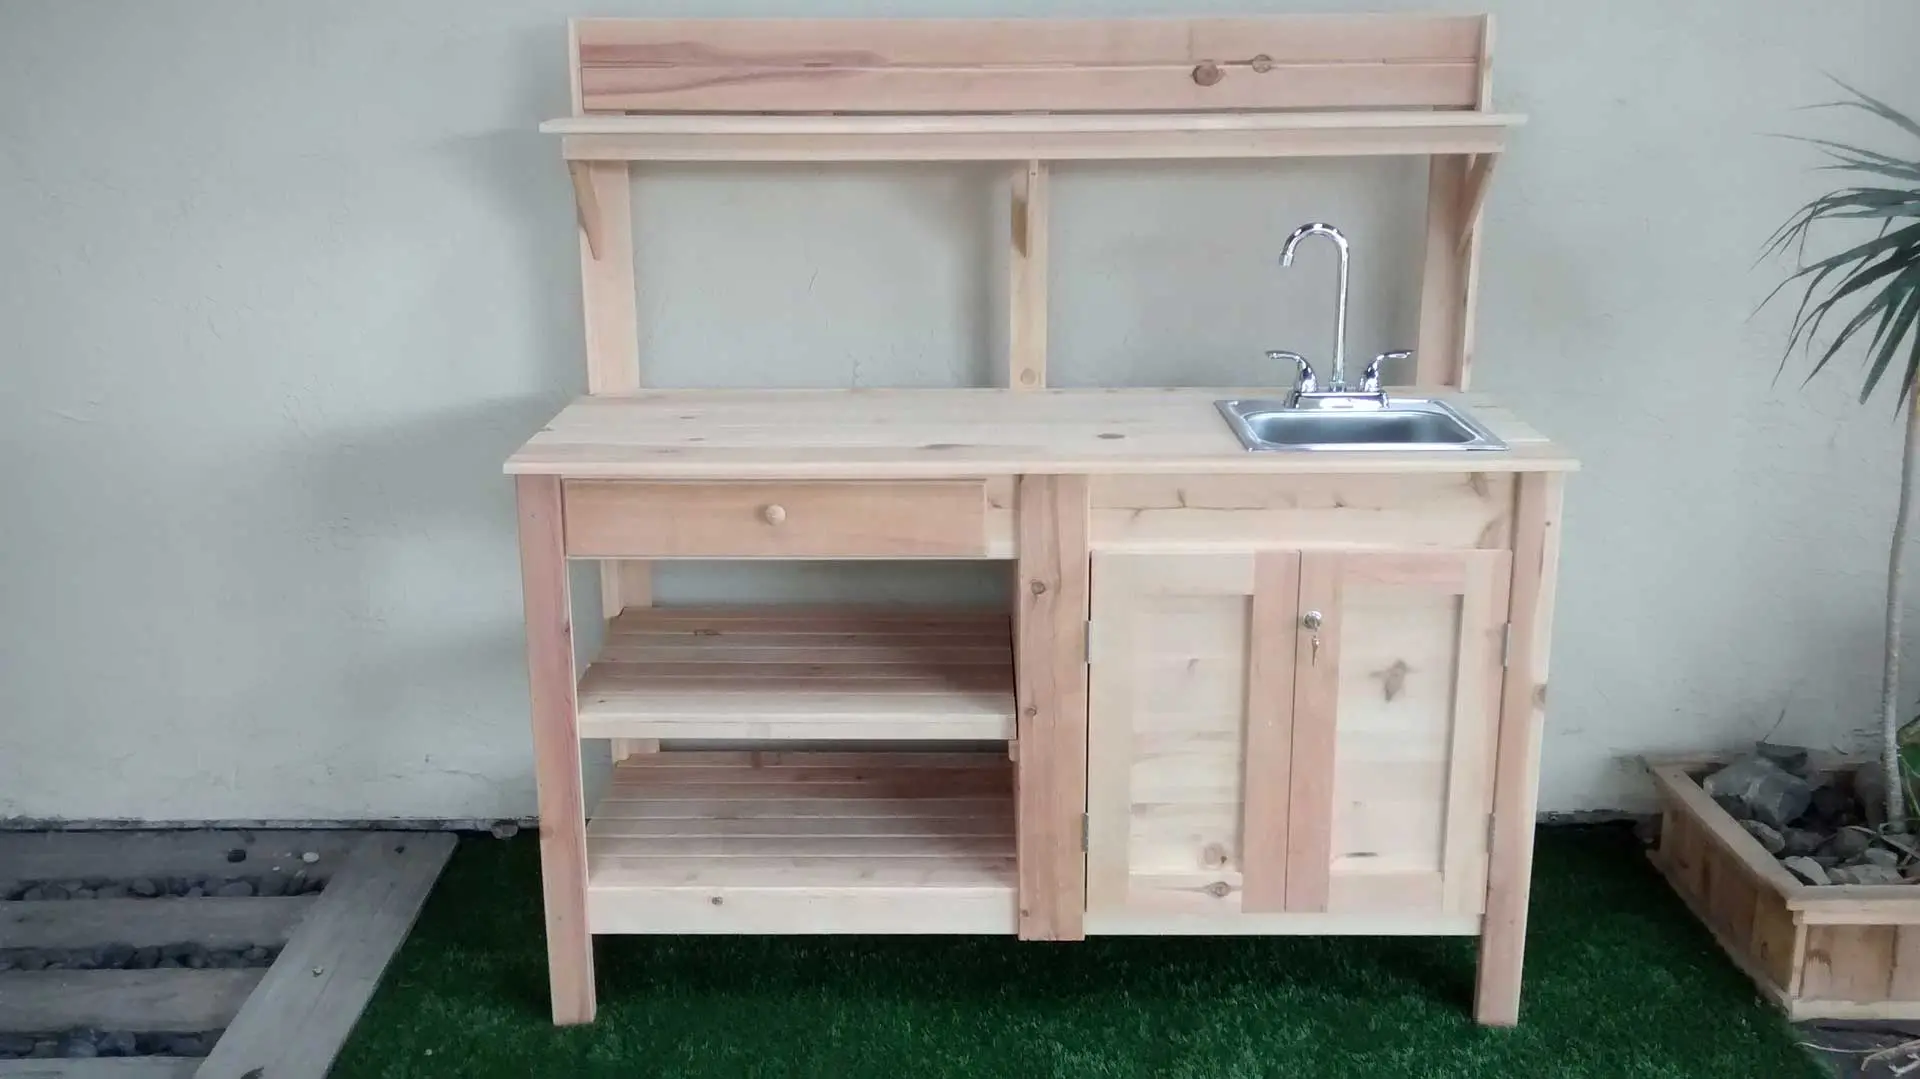 A wooden table with a sink and shelves